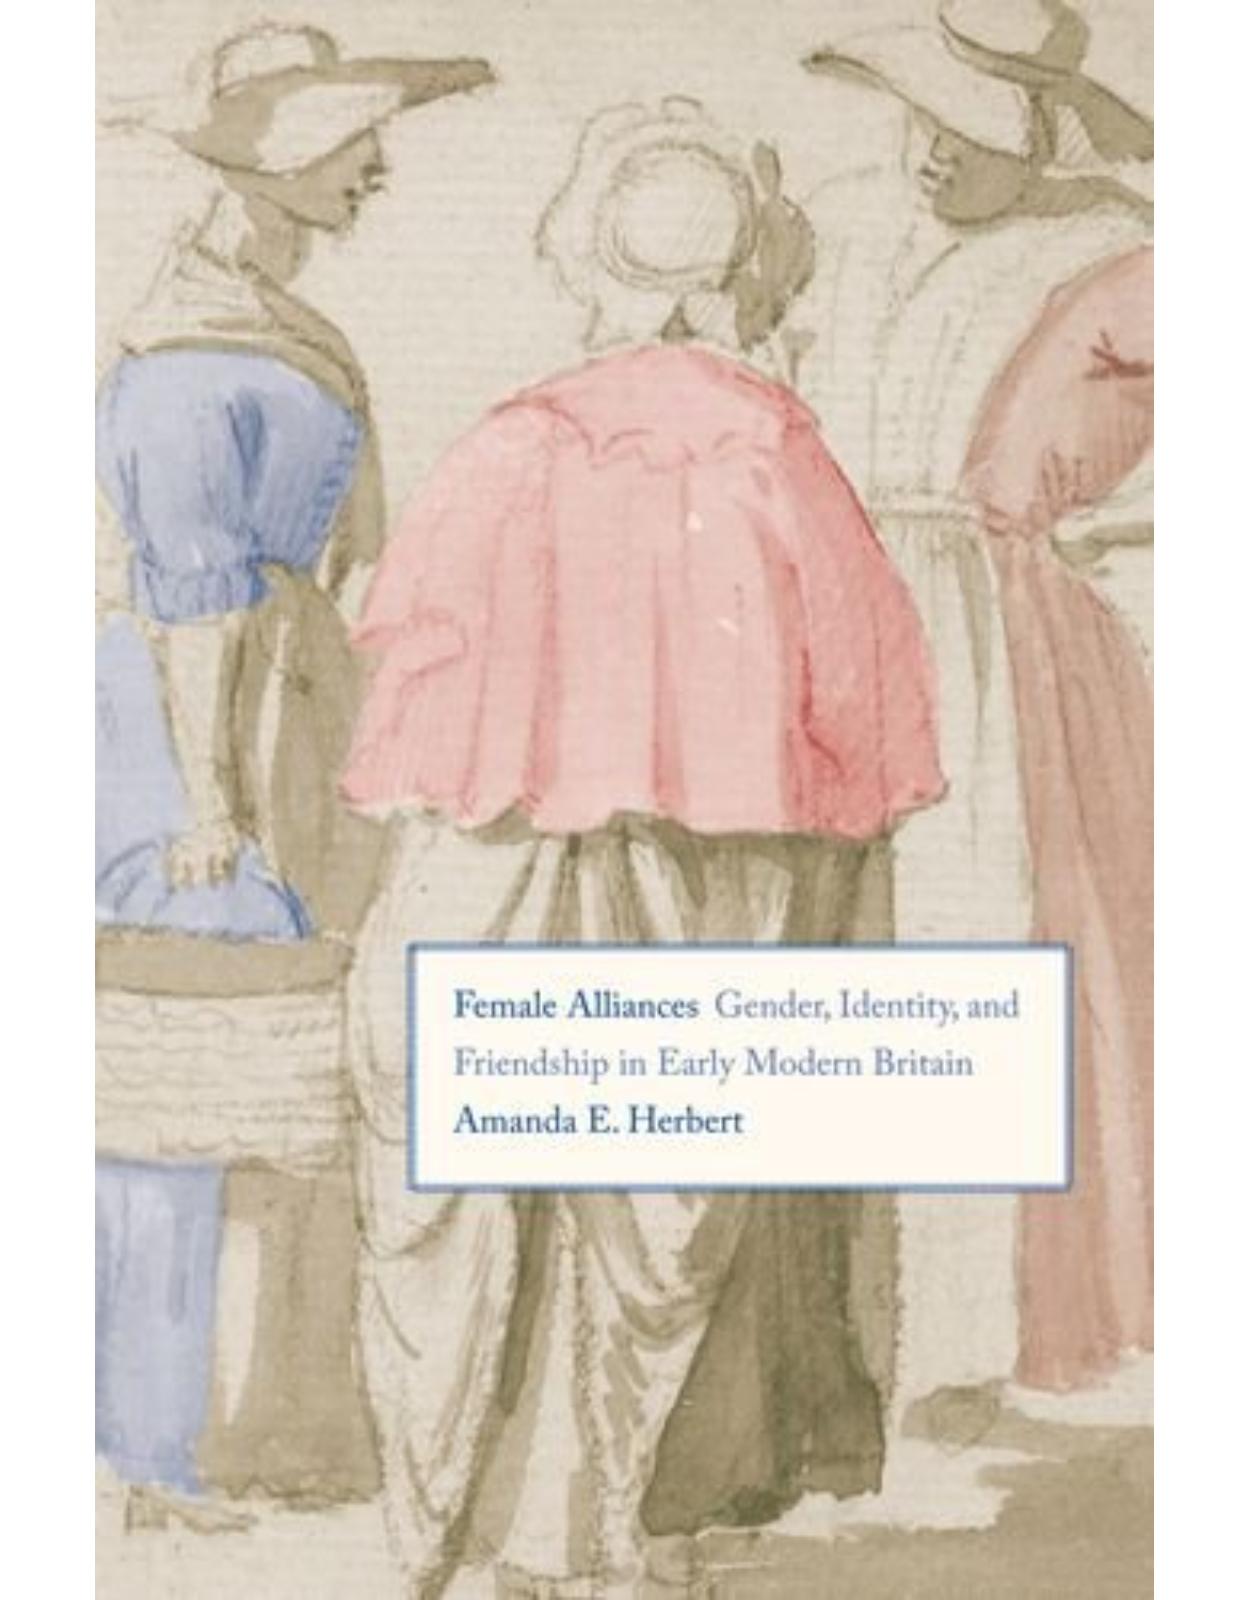 Female Alliances. Gender, Identity, and Friendship in Early Modern Britain